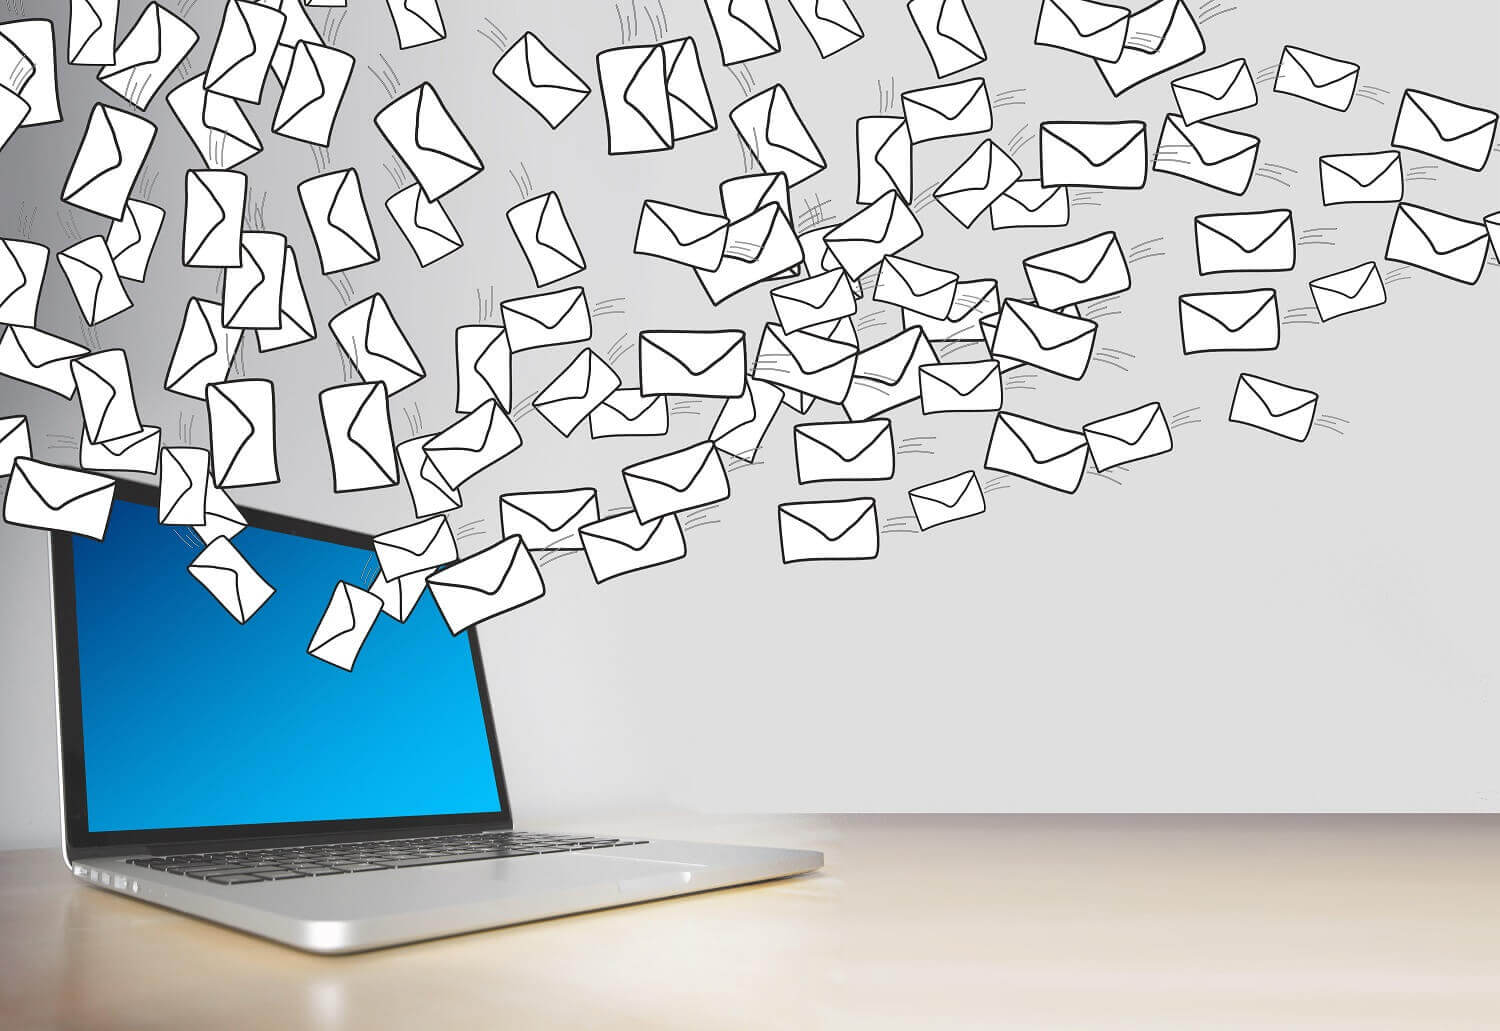 If you are getting too many emails in your inbox - this is the solution